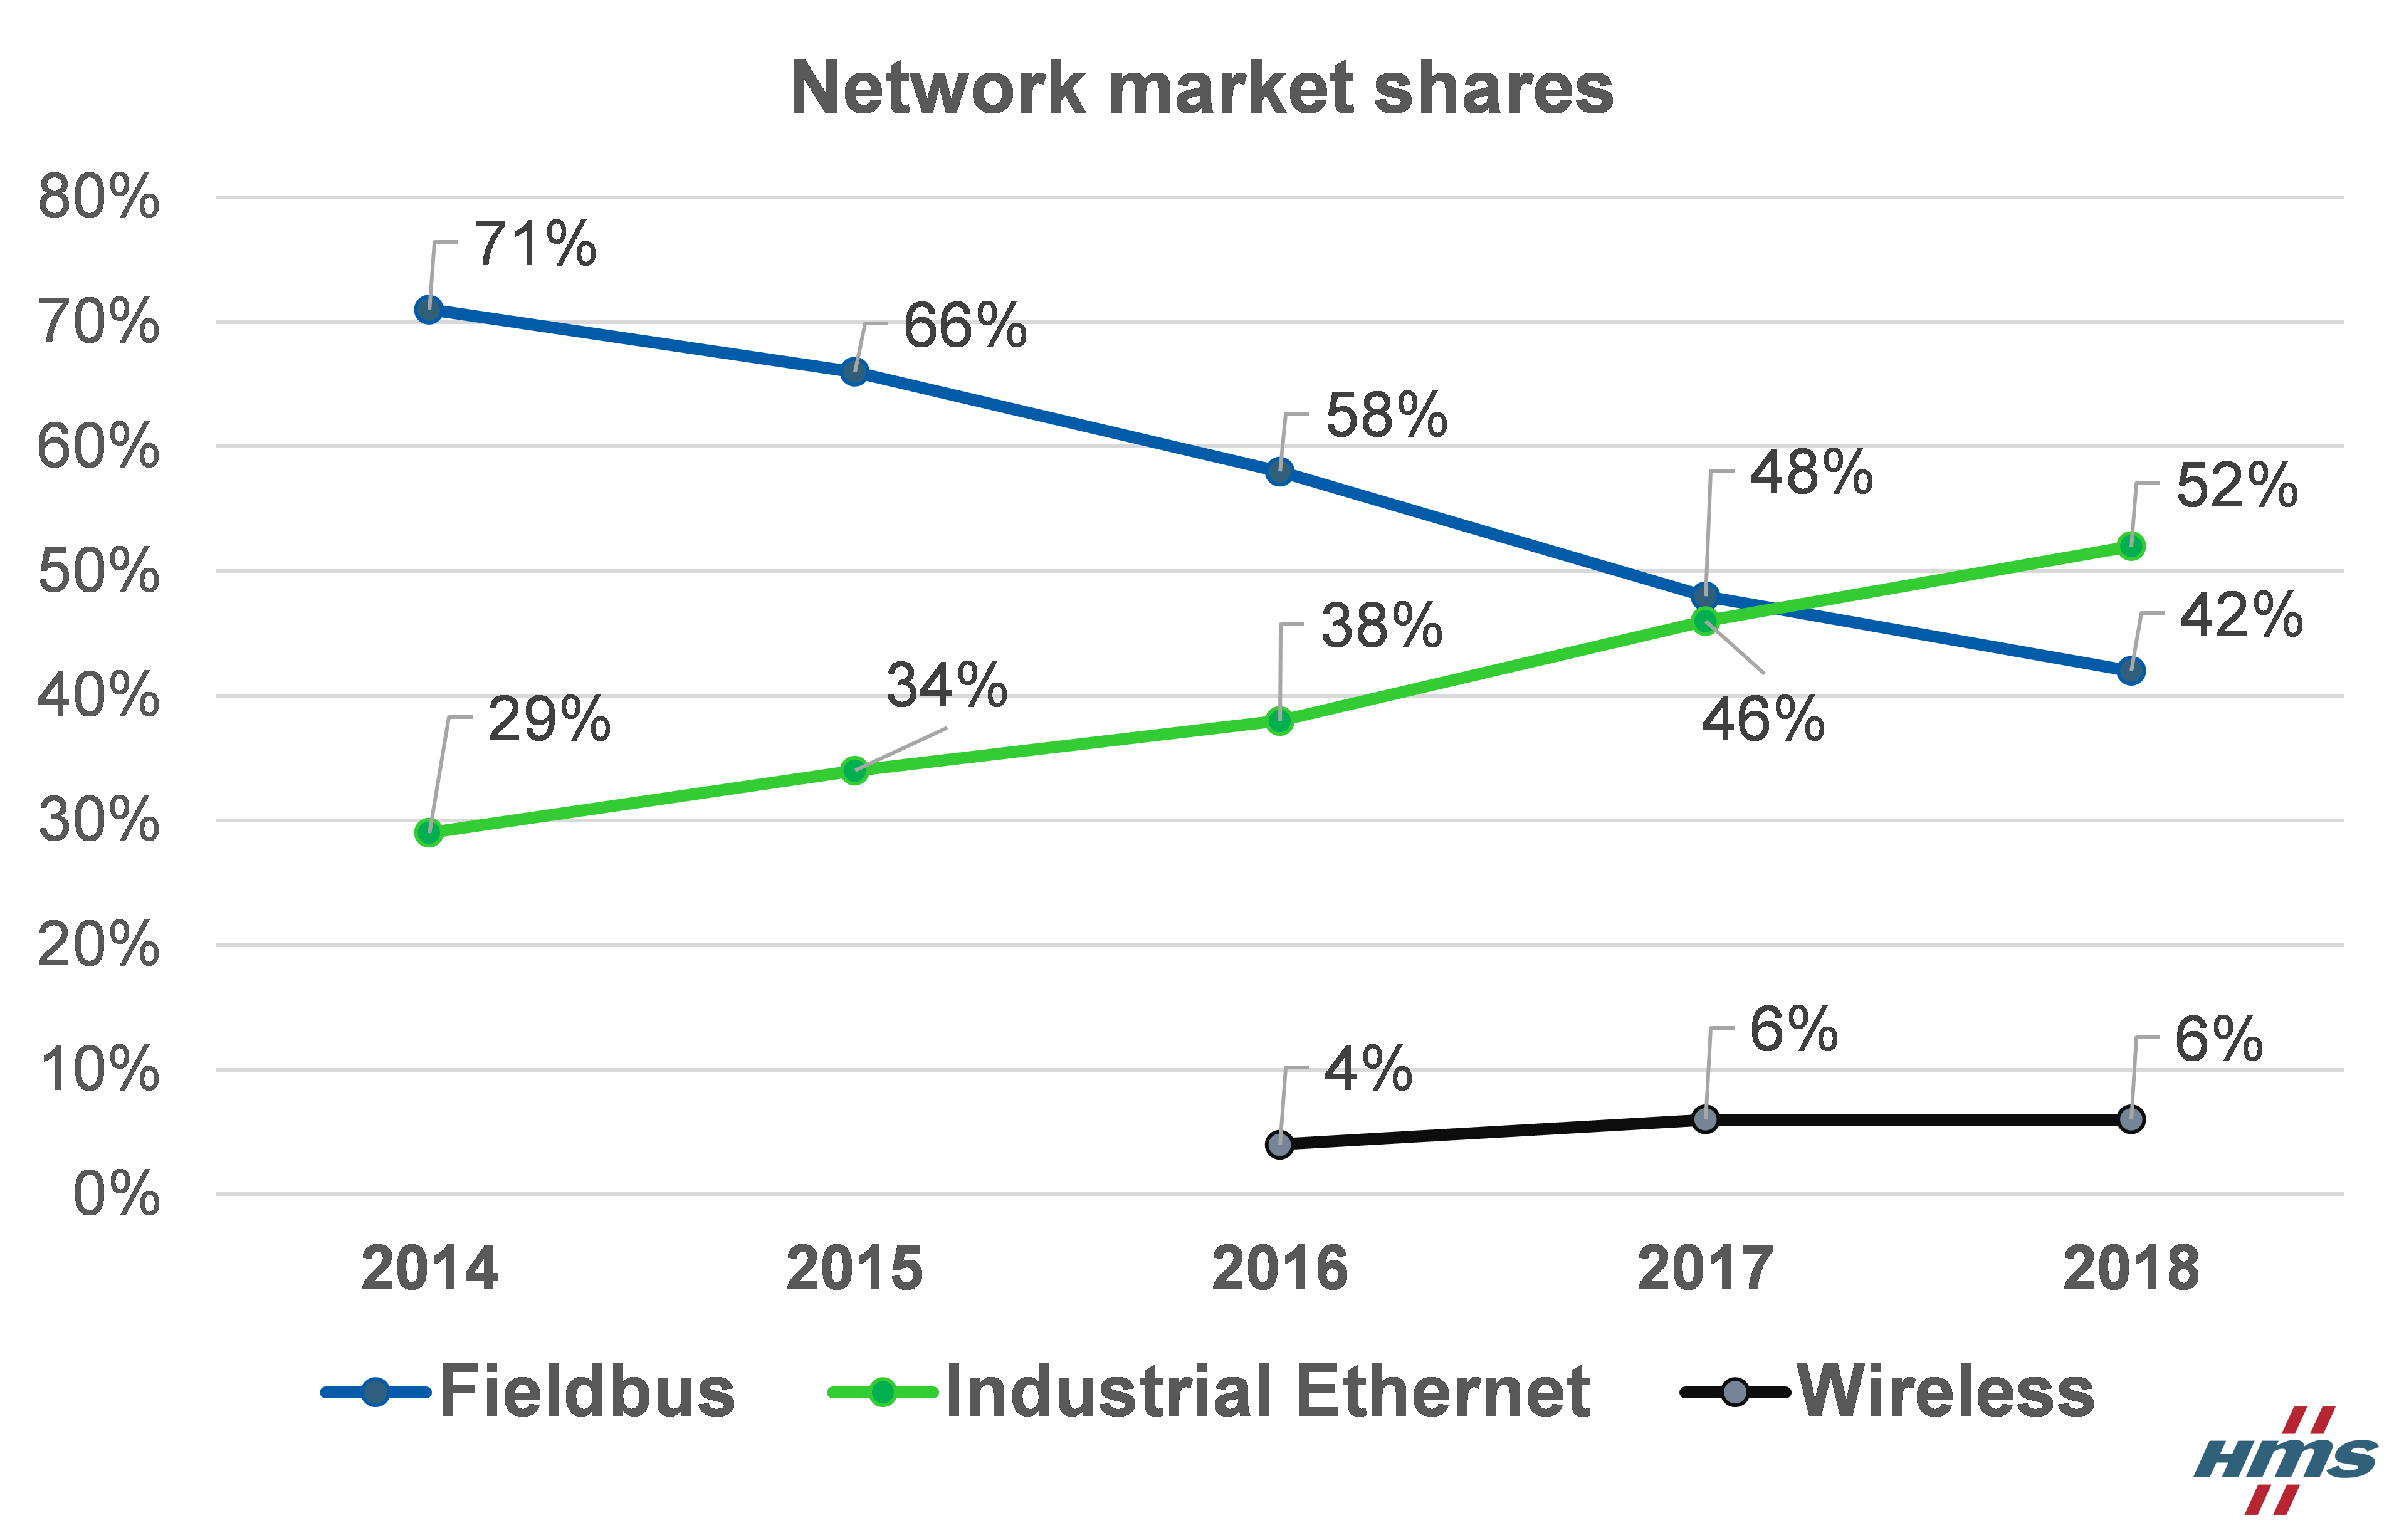 Market shares of newly installed nodes for fieldbuses, Industrial Ethernet and wireless technologies from 2014 to 2018. Source: HMS. (Click image to enlarge.)